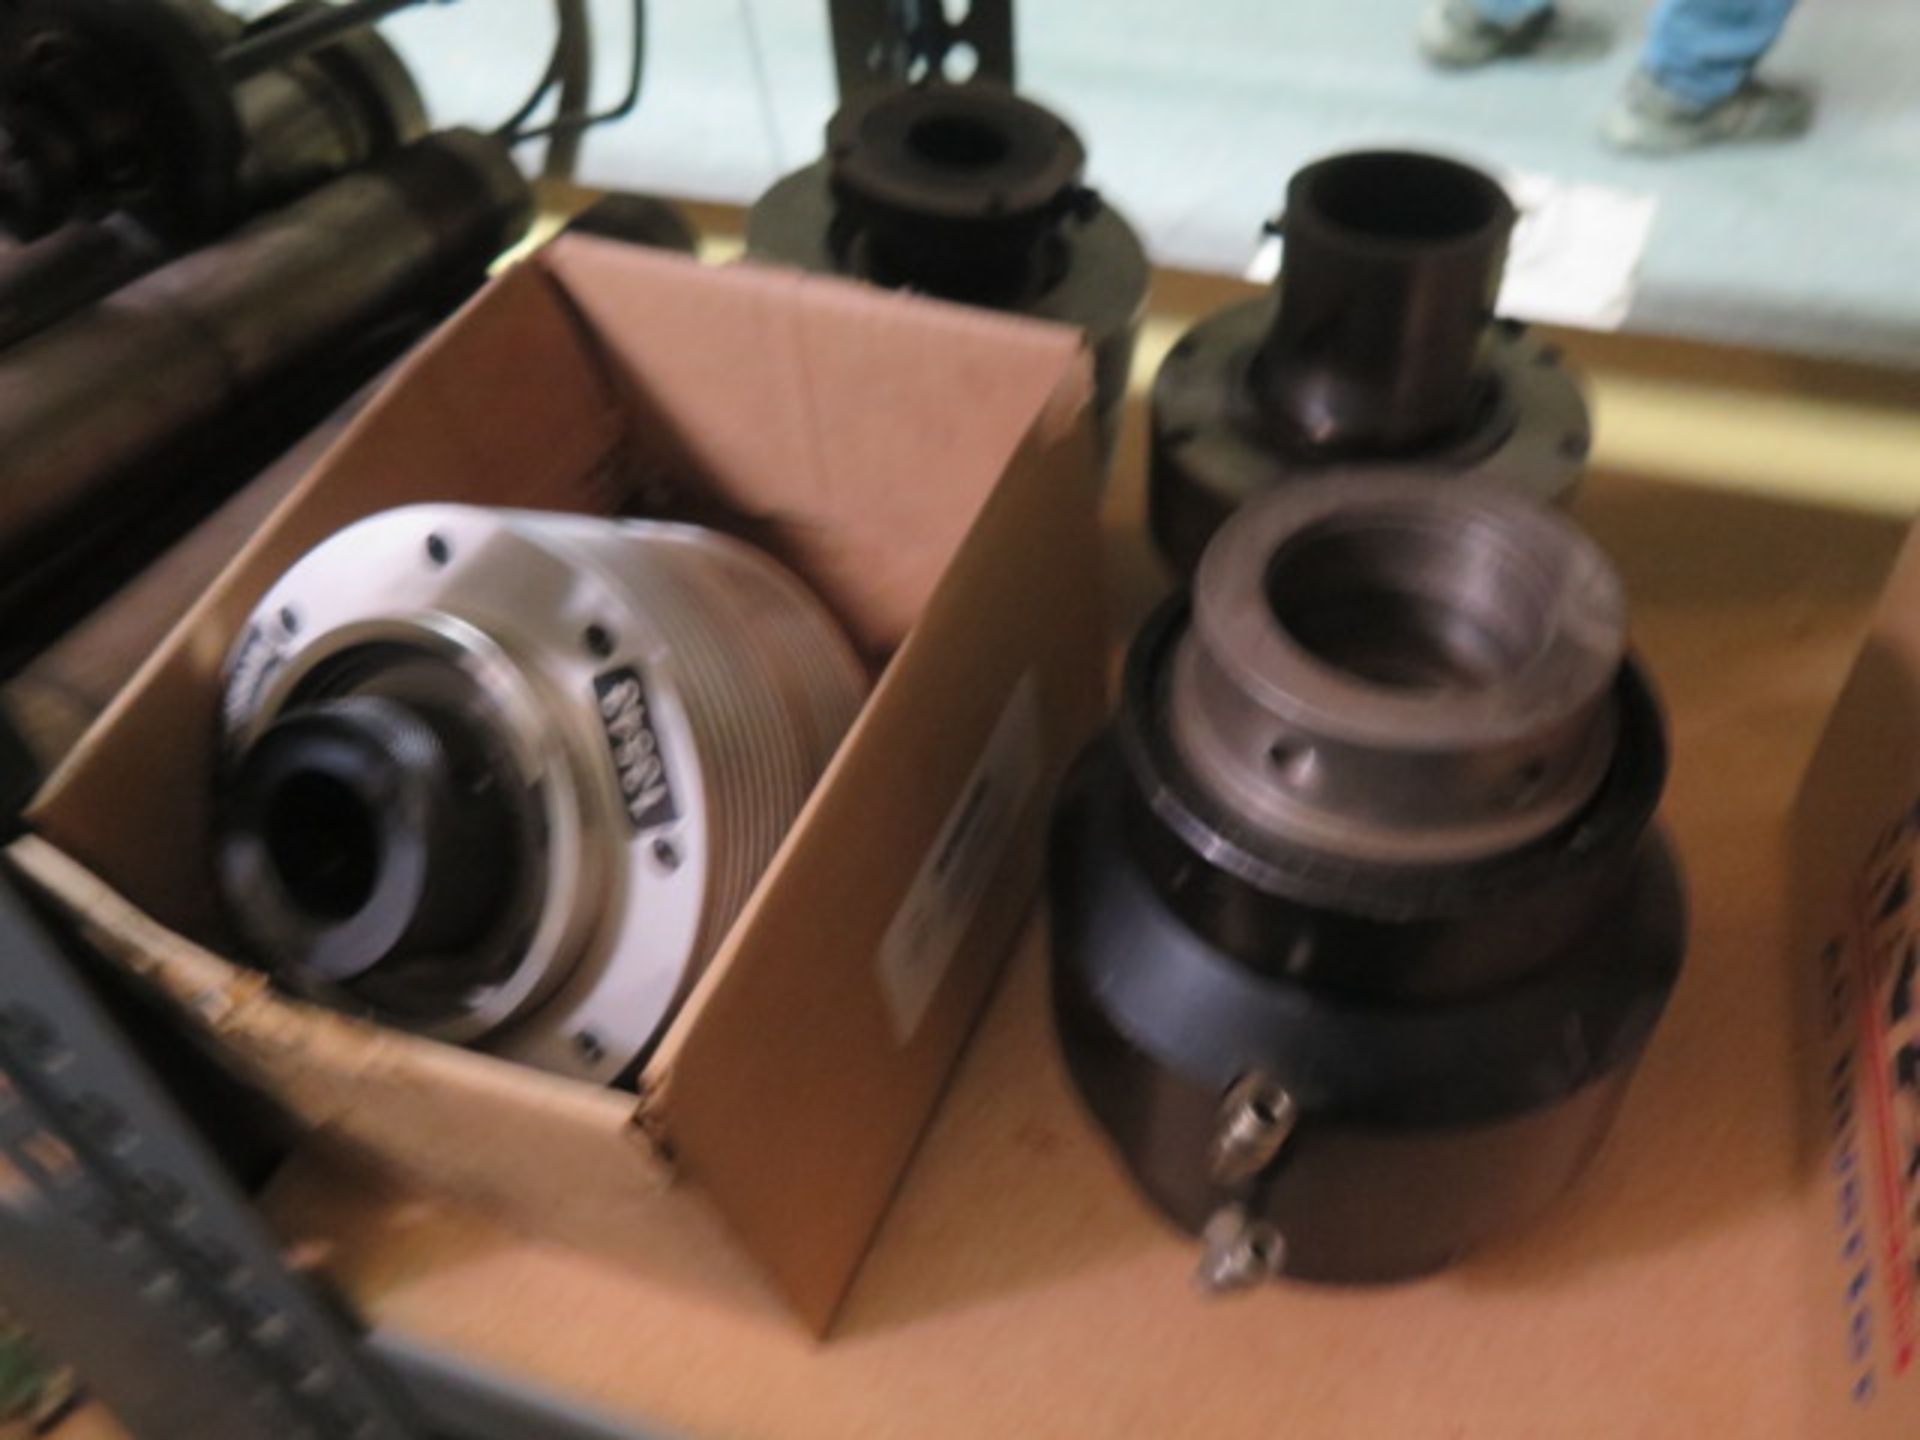 Large Quantity of Machine Replacement Parts Including Spindles, Bearings, Pneumatic Collet - Image 13 of 30